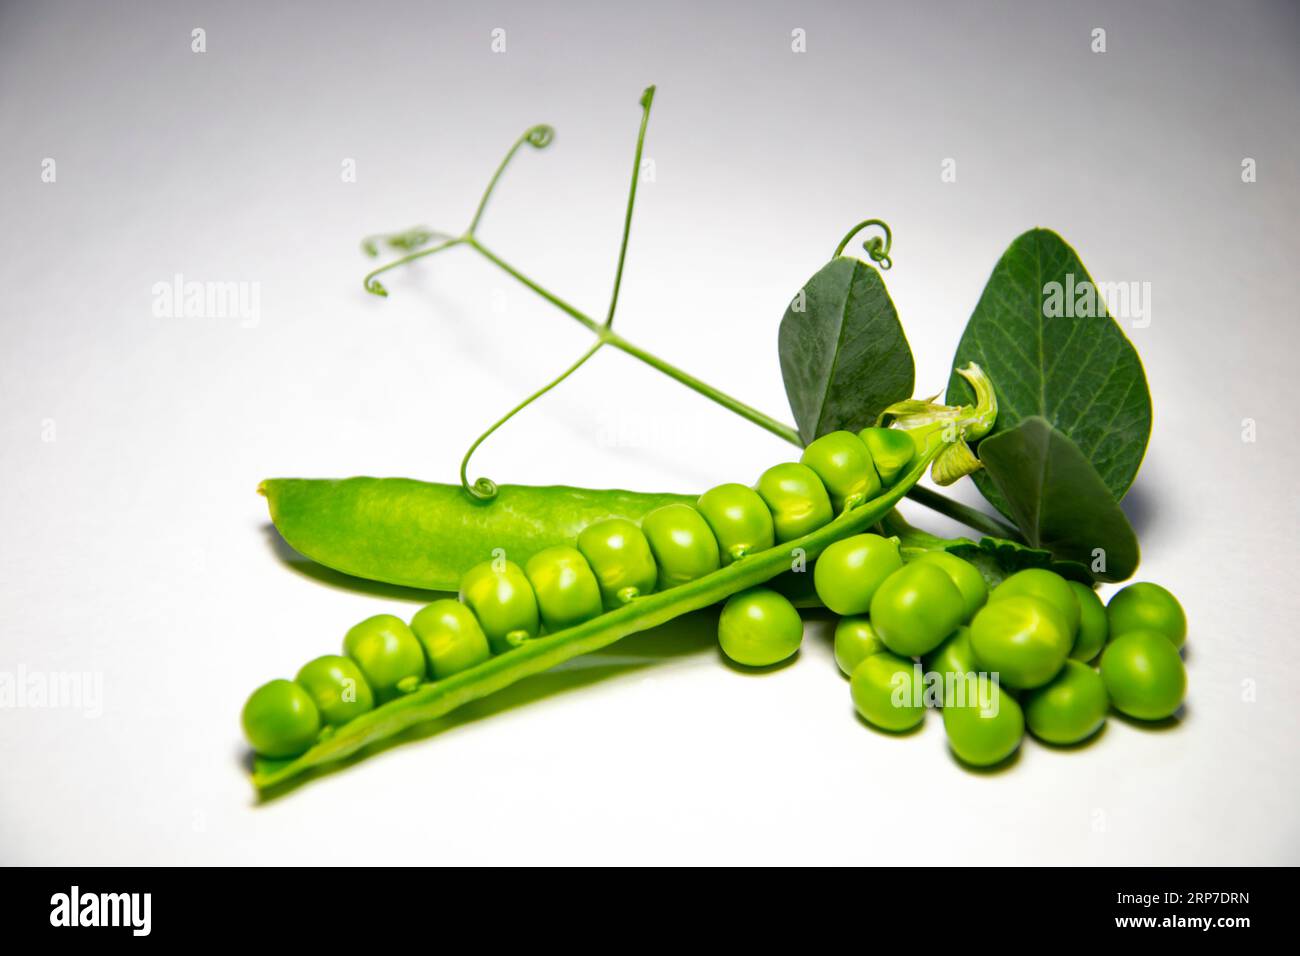 Fresh green peas. Several peas and an open pod on a light background. Close-up. Stock Photo